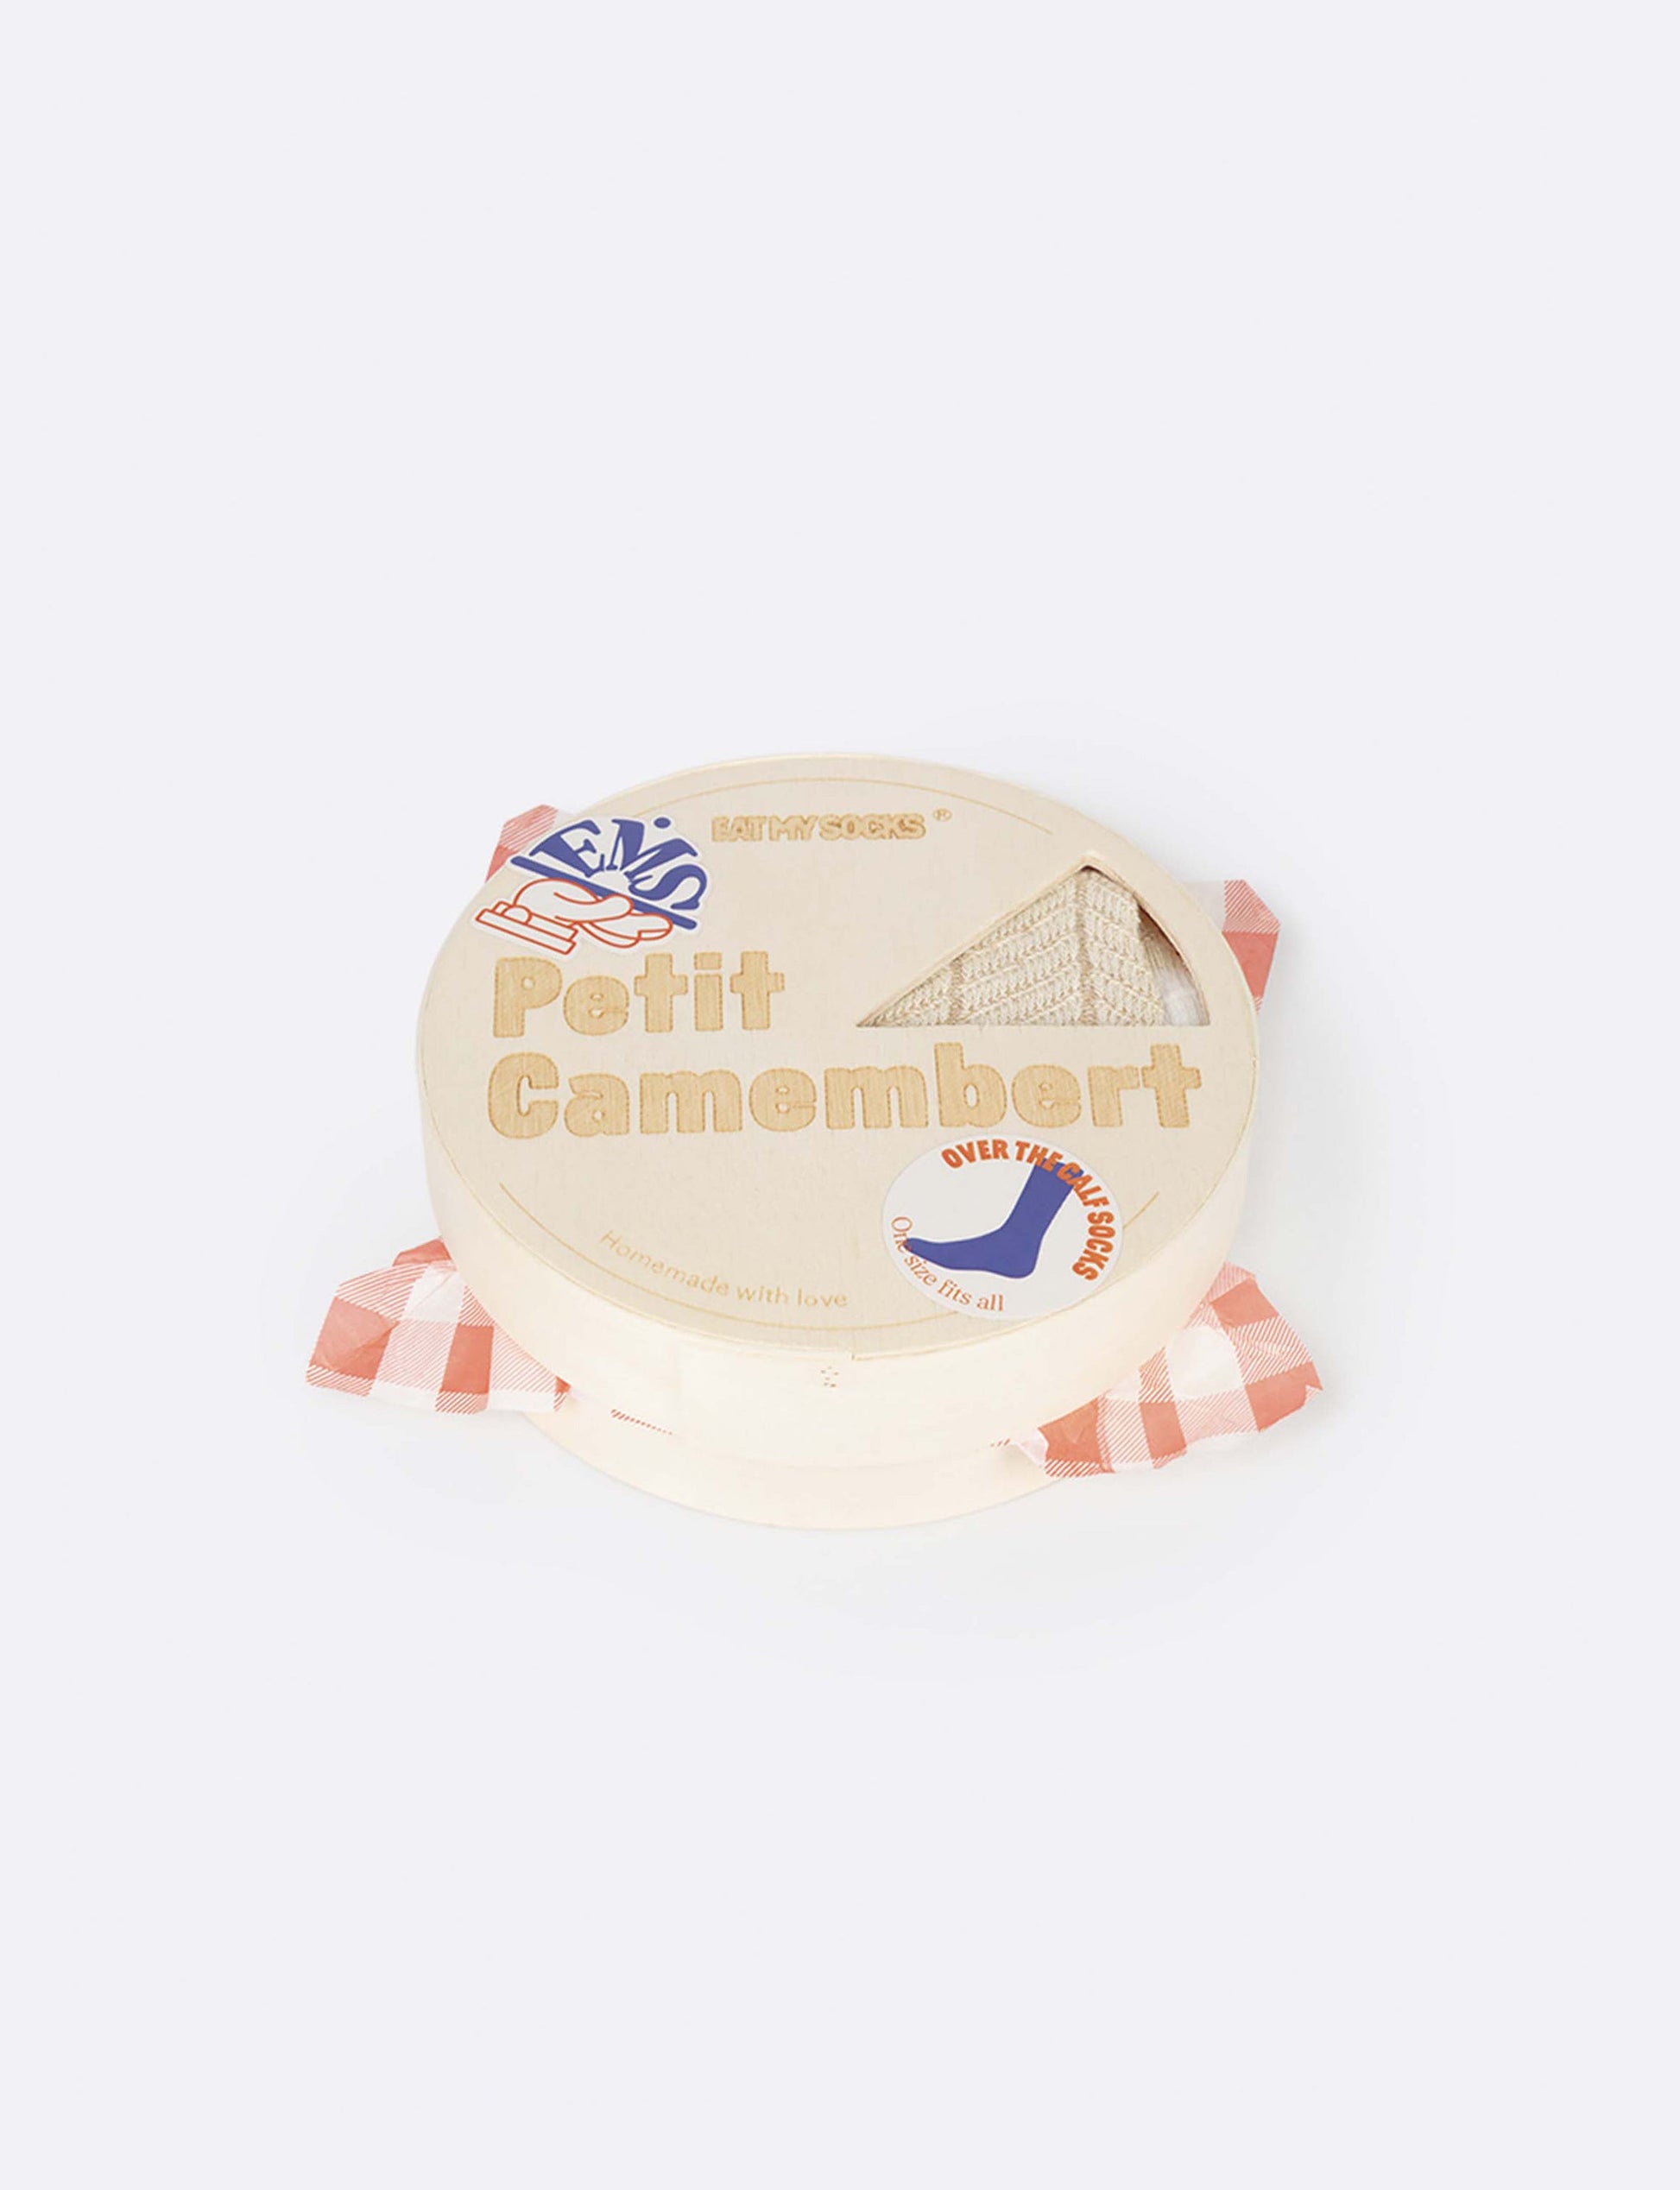 Camembert socks packaged in round, wooden container